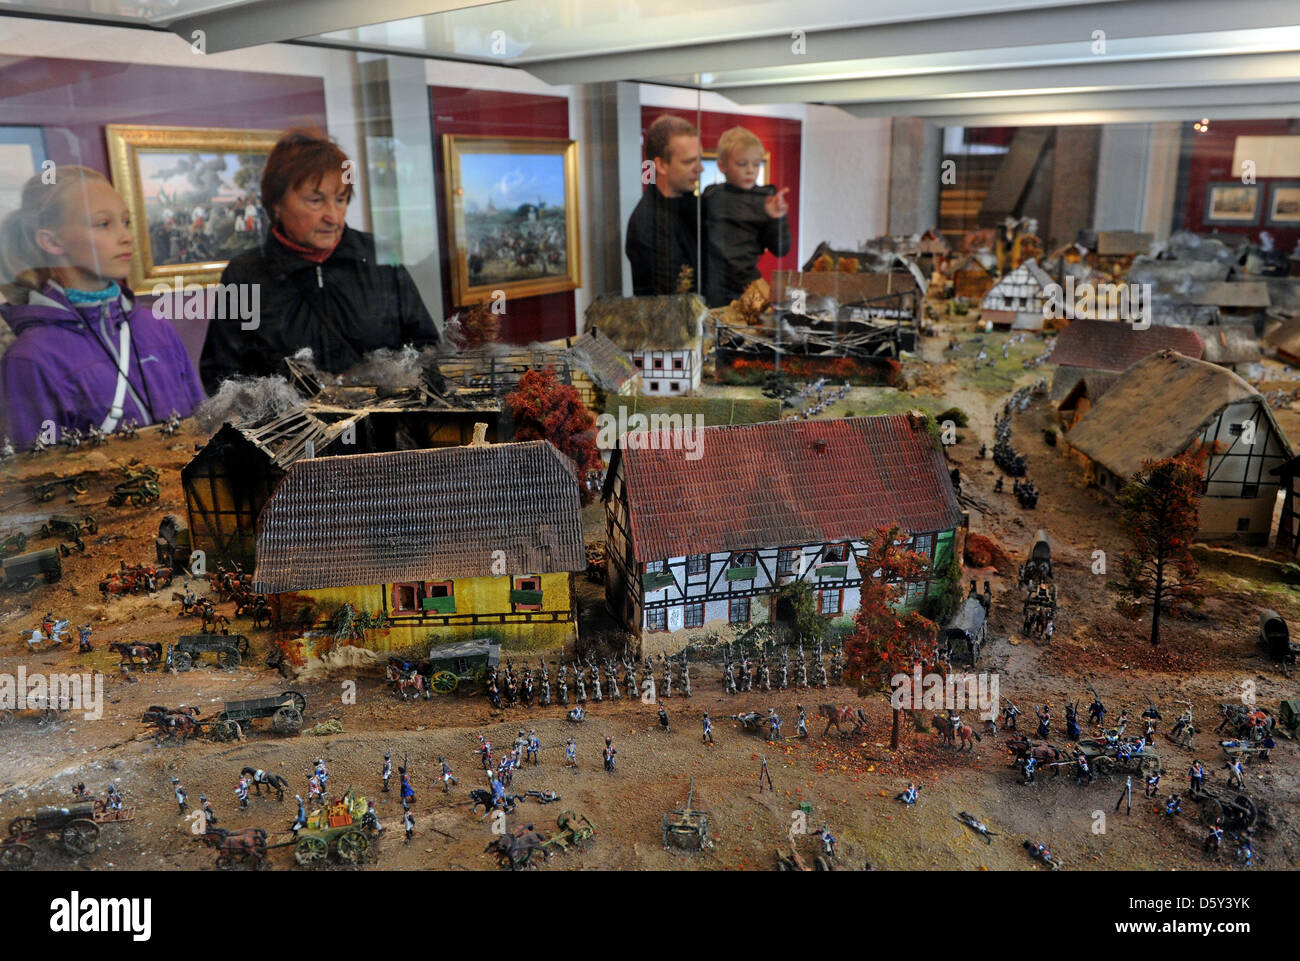 Visitors to the museum at the Memorial to the Battle of Leipzig look at a diorama with a depiction of the battle in Leipzig, Germany, 10 October 2012. The 200th anniversary of the battle is in October 2013. There will be a reinactment of the battle between Napolean's troups and a coalition of Prussia, Russia, Austria and Sweden with a few thousand participants from all over Europe. Stock Photo